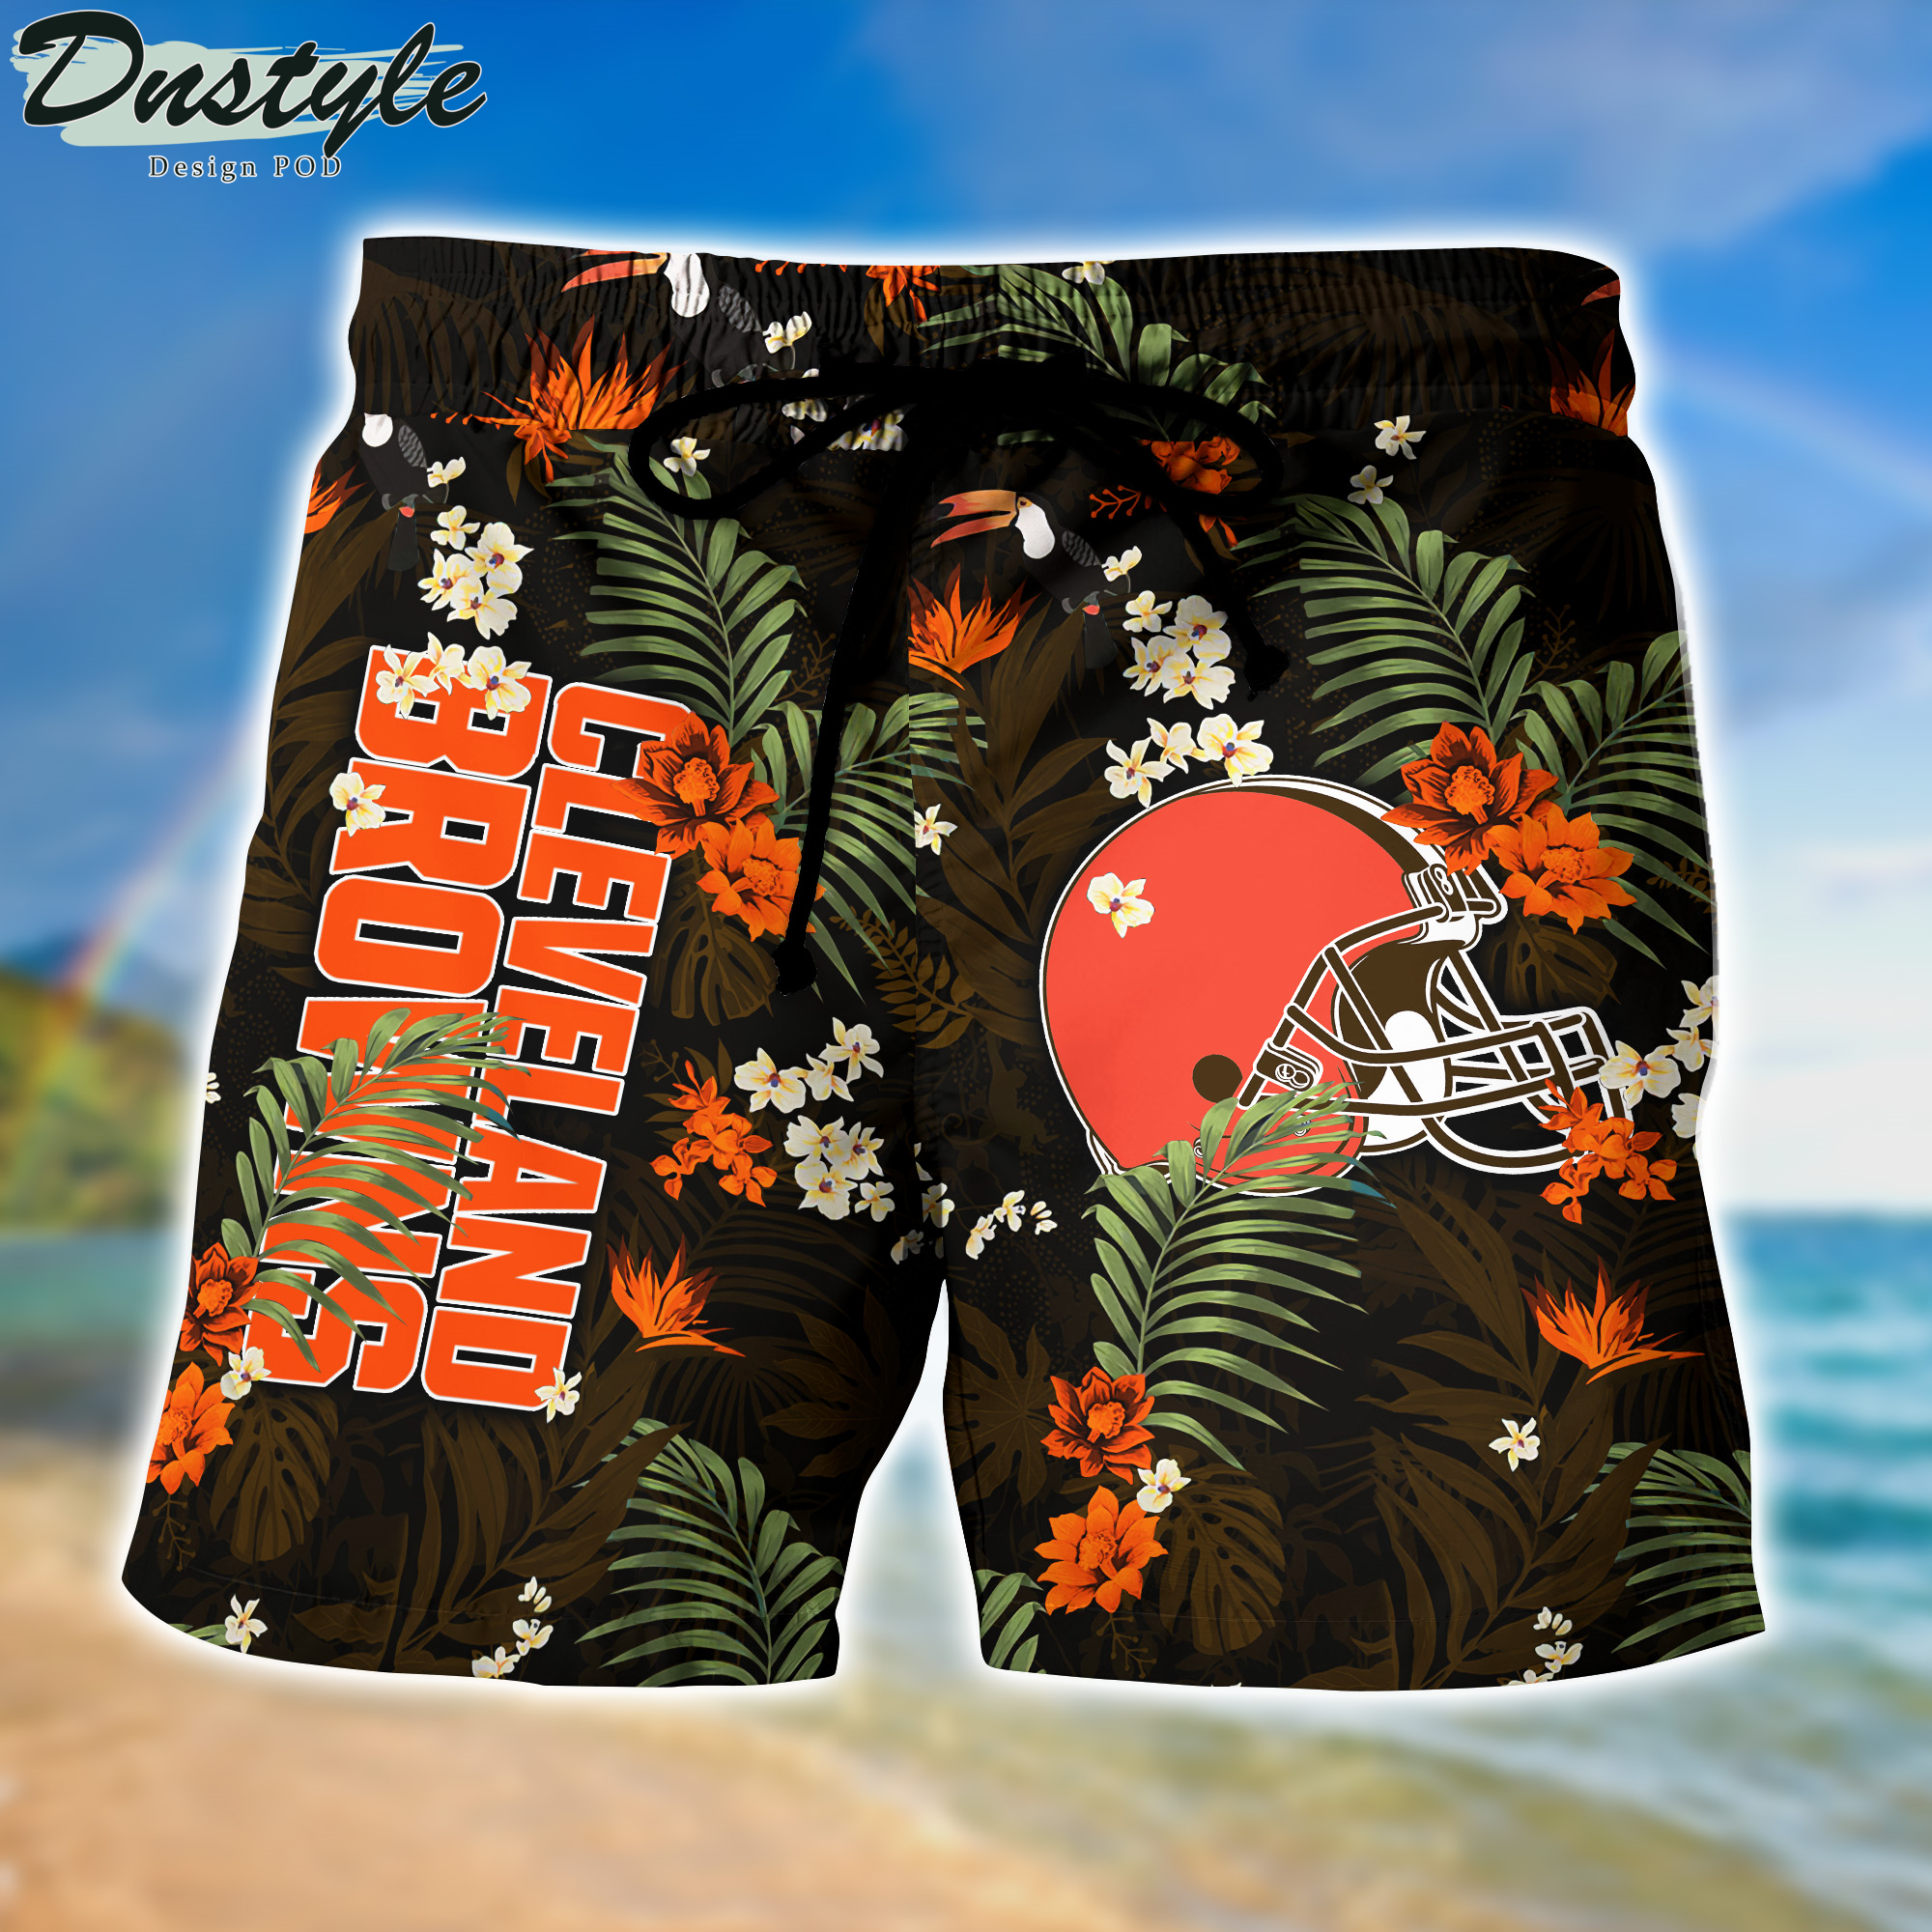 Cleveland Browns Hawaii Shirt And Shorts New Collection